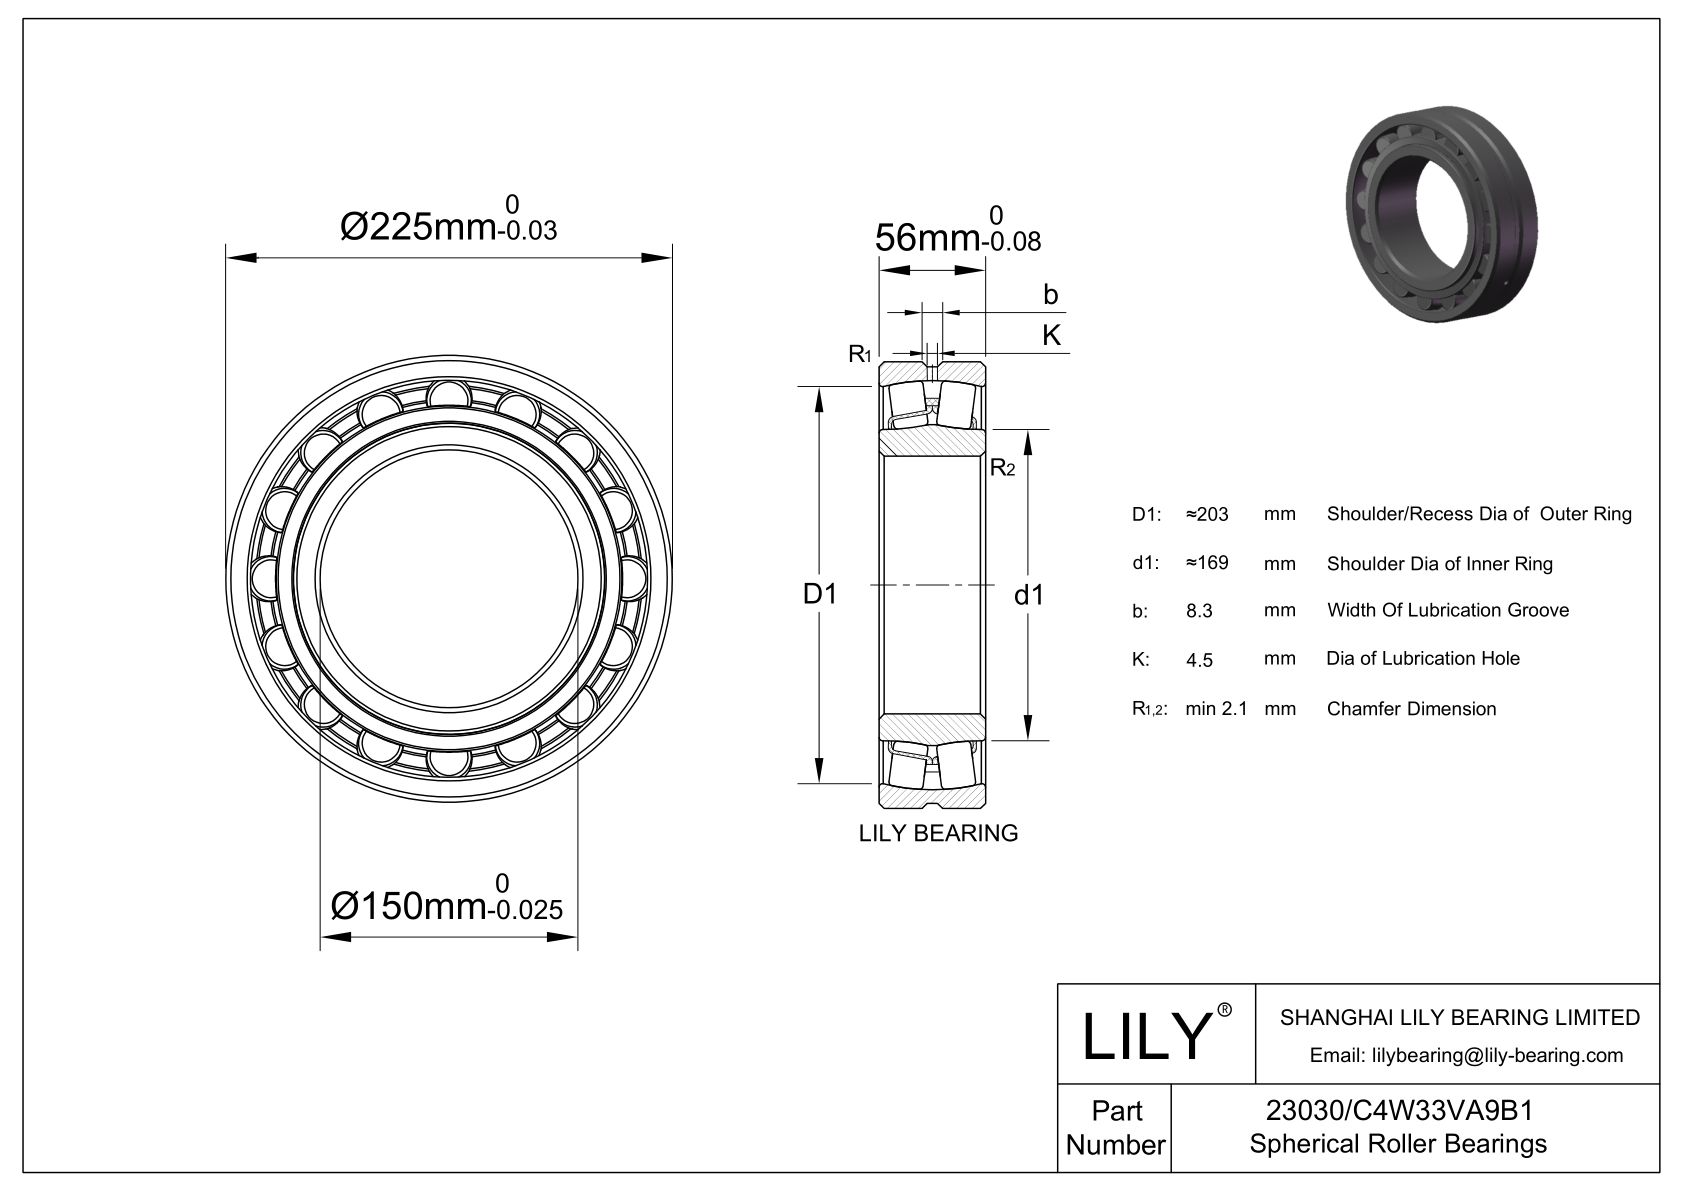 23030/C4W33VA9B1 Double Row Spherical Roller Bearing cad drawing